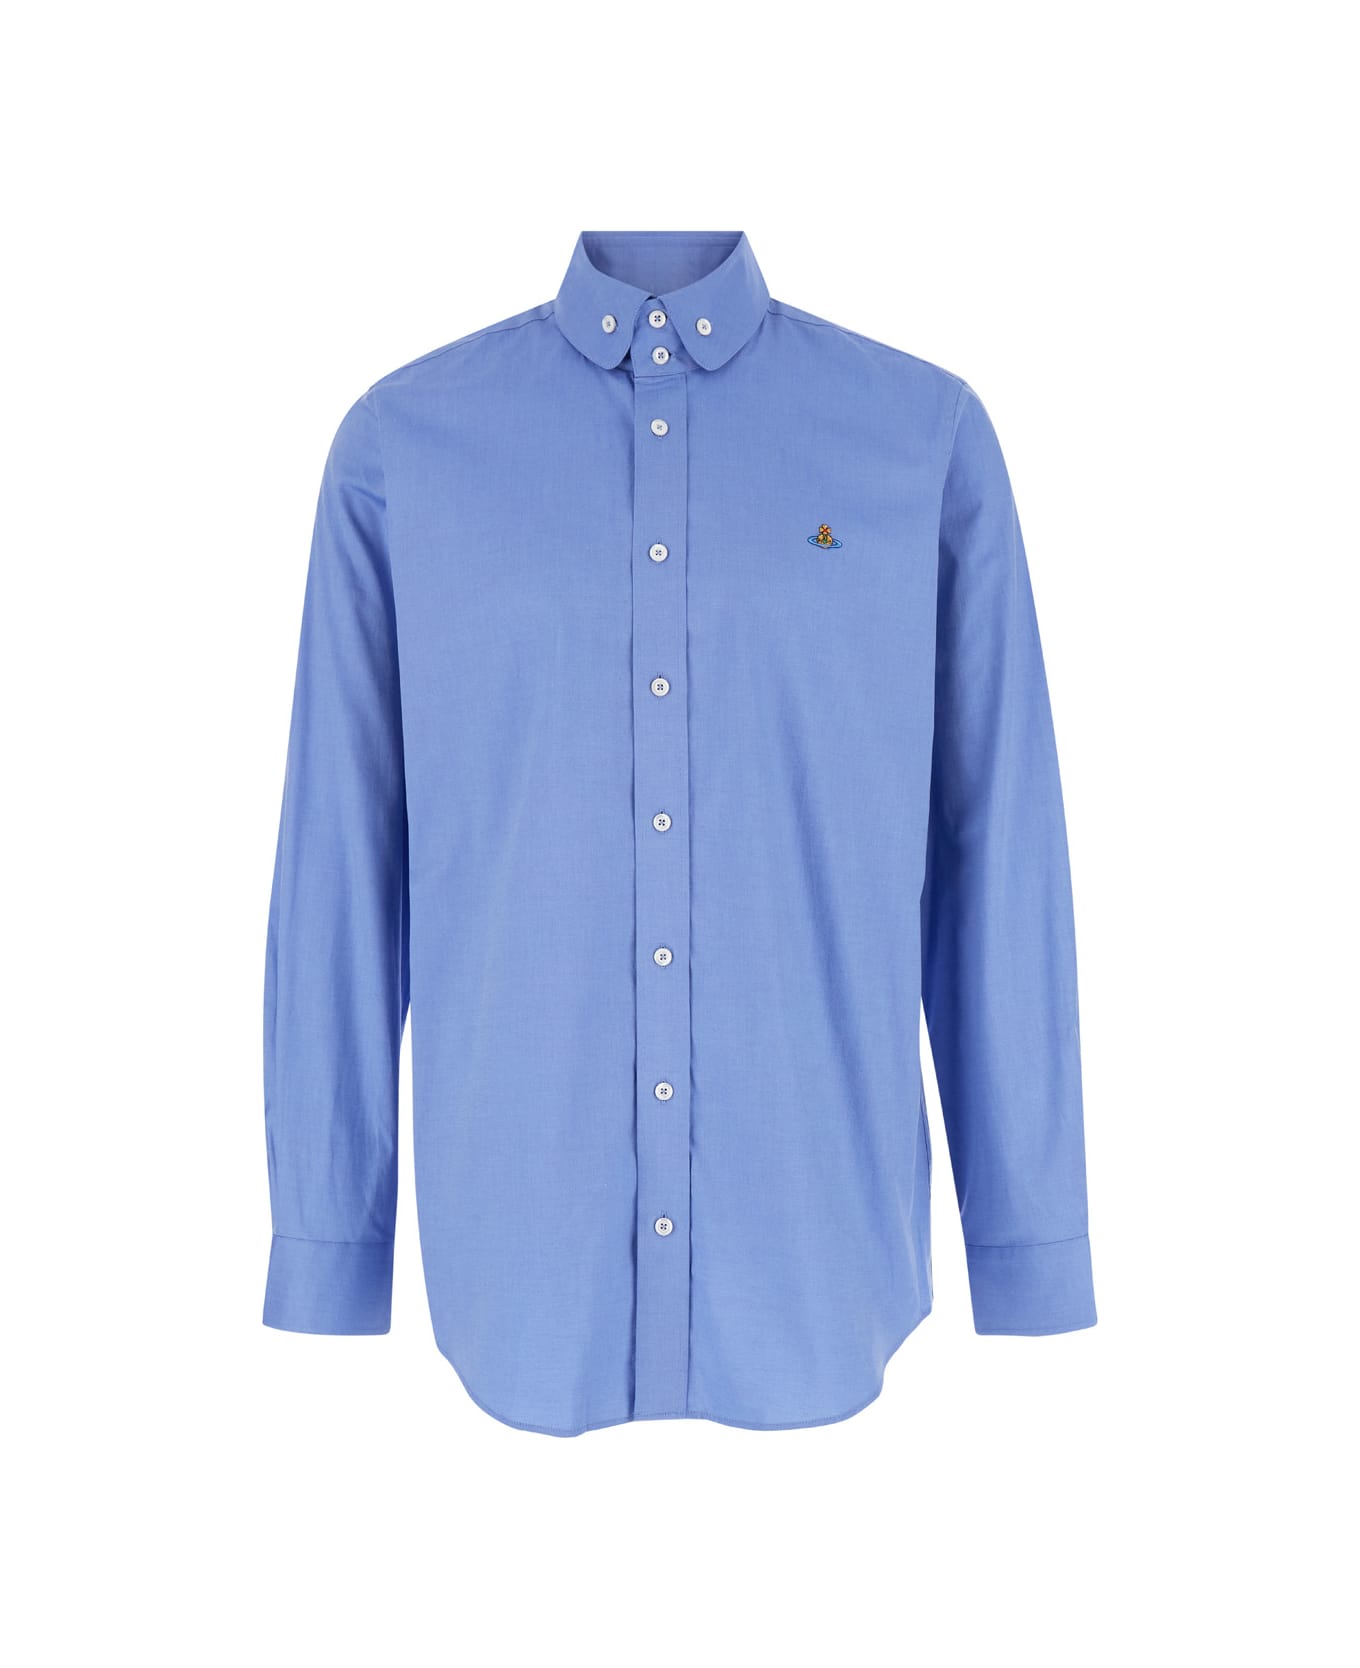 Vivienne Westwood Light Blue Shirt With Buttons In Cotton Man - Blu